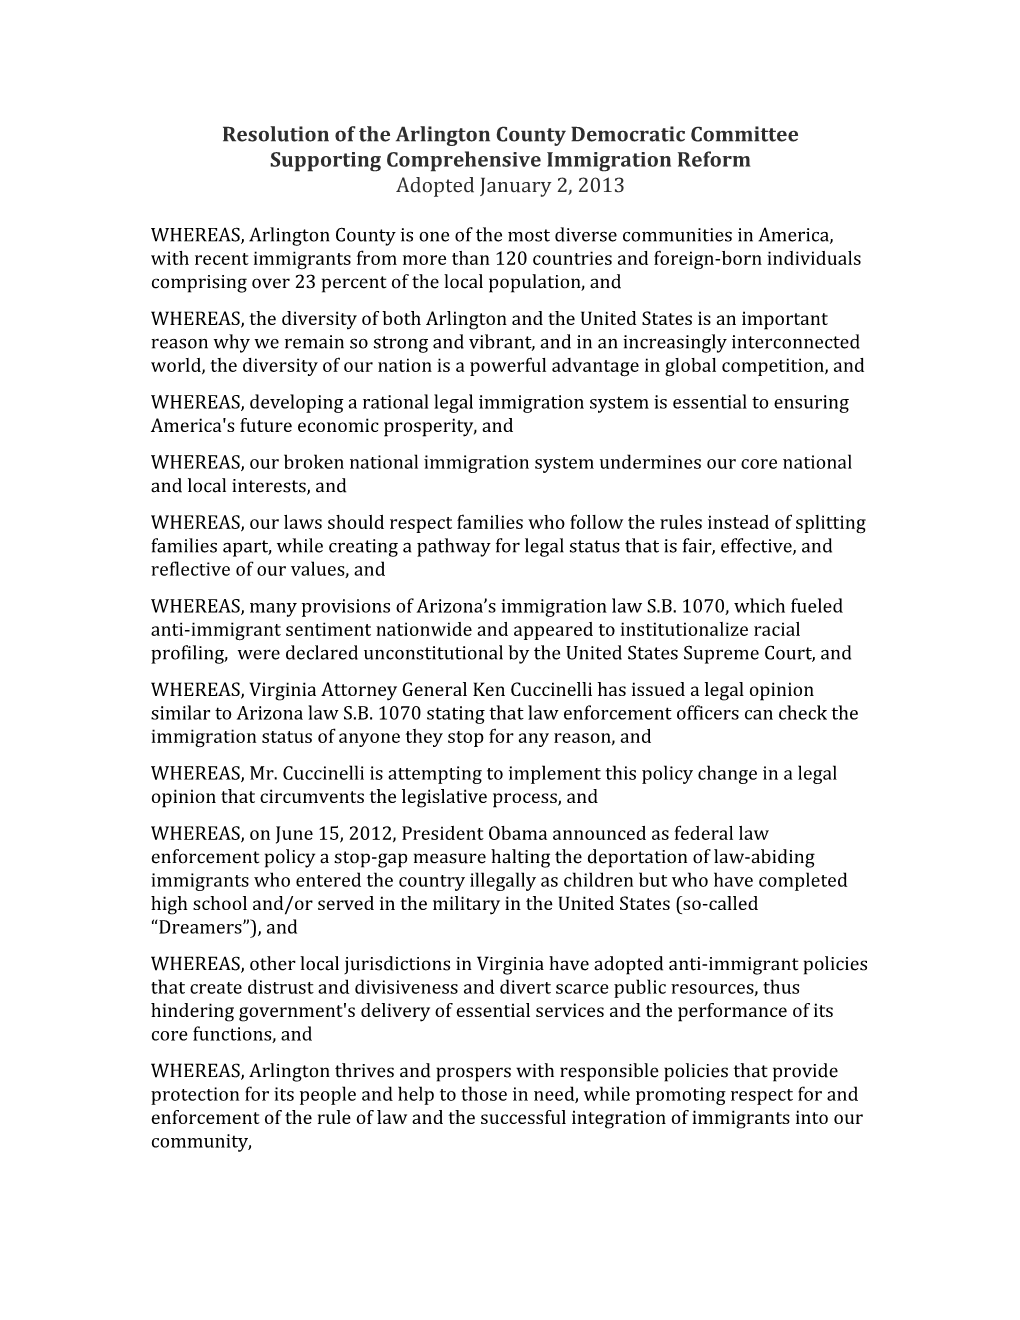 Resolution Supporting Comprehensive Immigration Reform